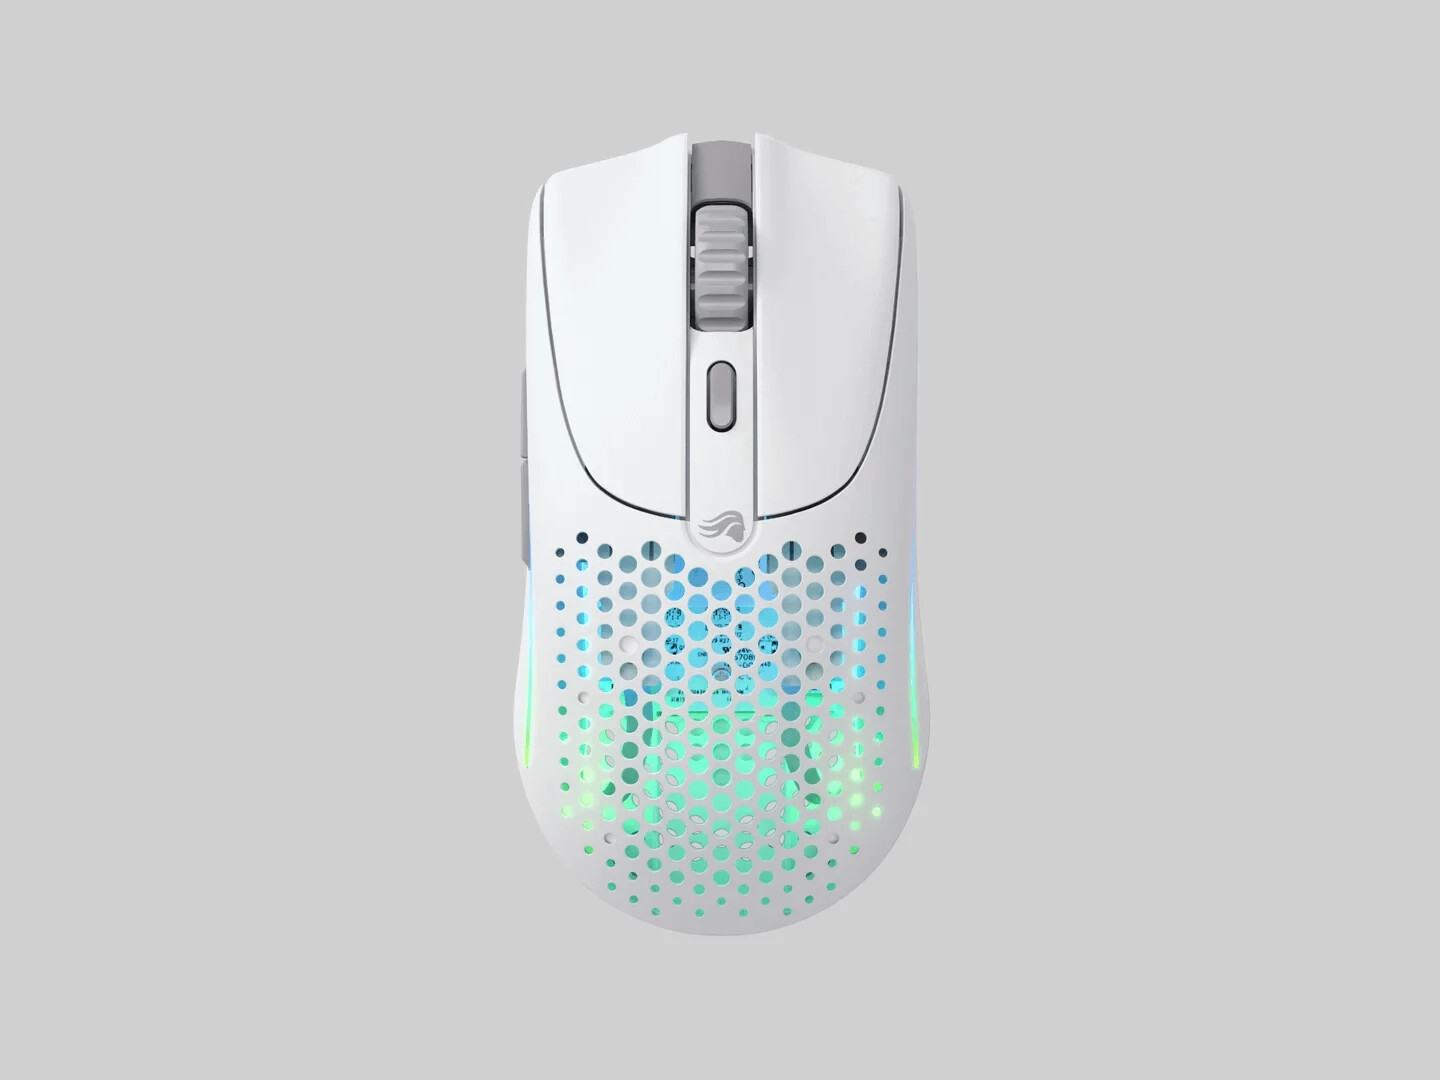 Glorious Model O 2 Gaming Mouse Release Date Confirmed - returnal